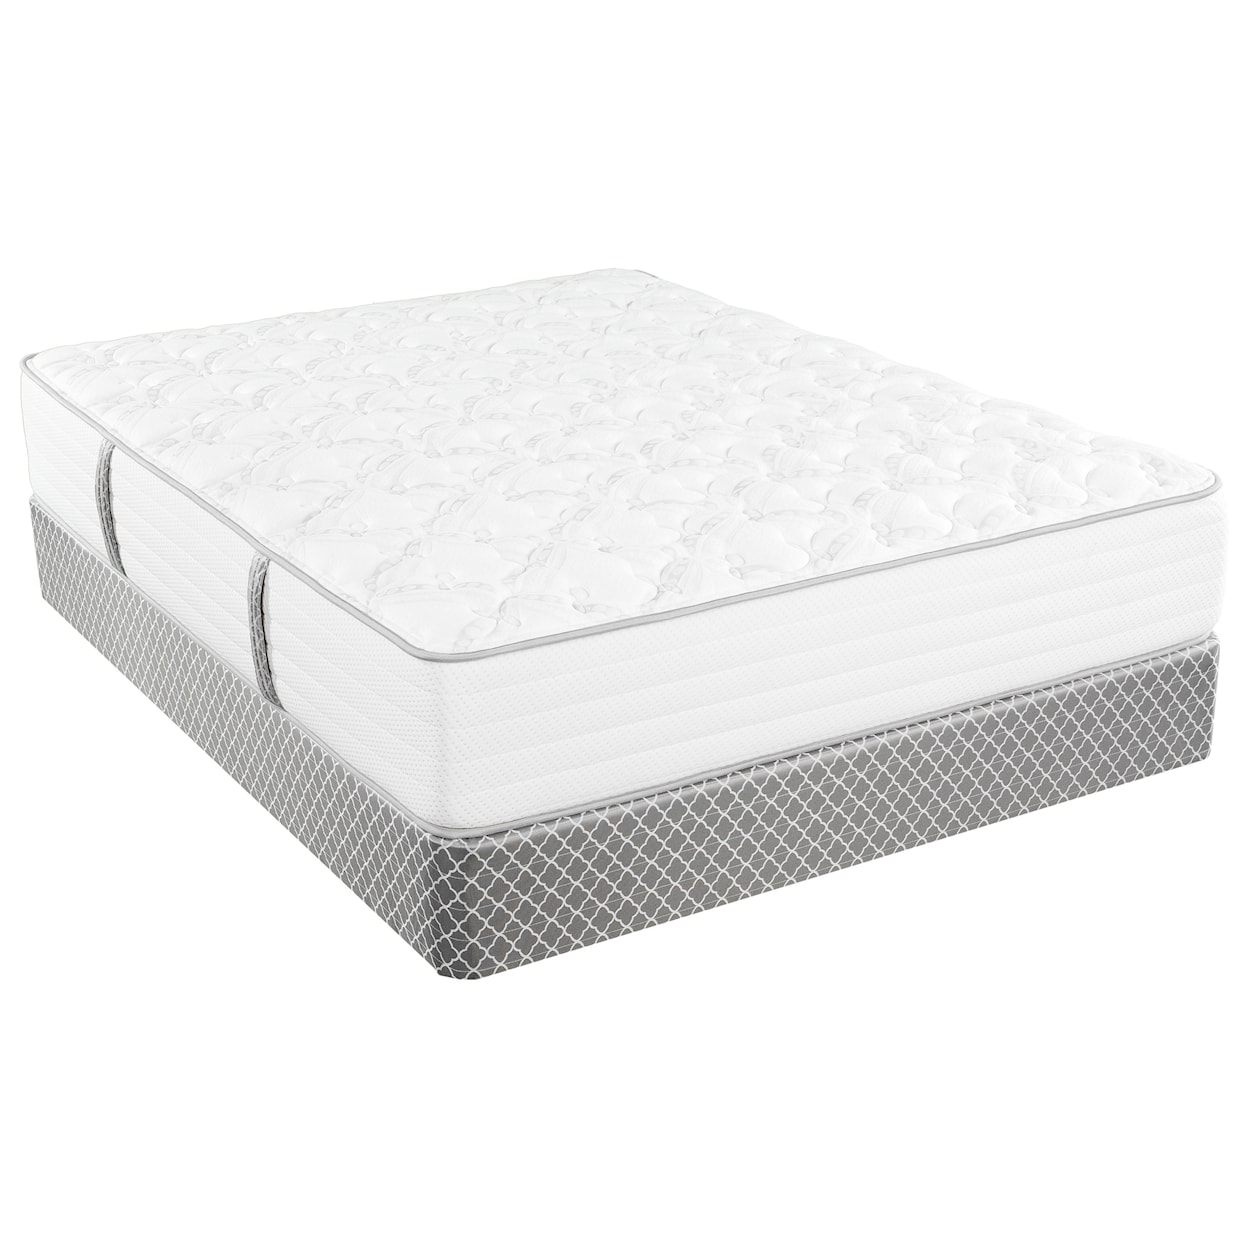 King Koil Gracie Firm Cal King Firm Pocketed Coil Mattress Set